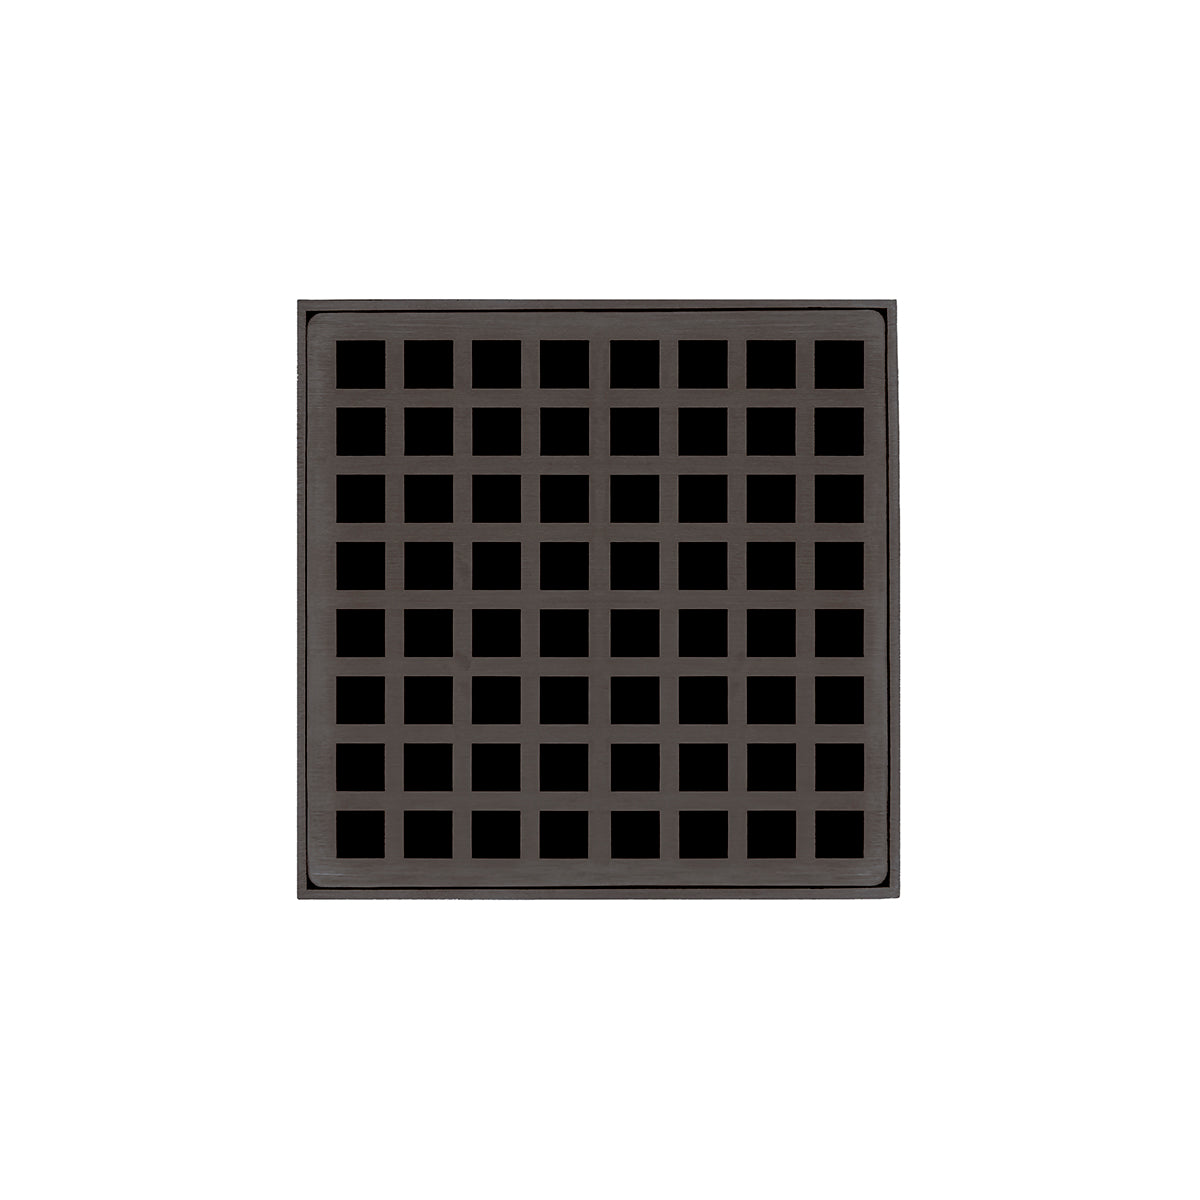 Infinity Drain 5" x 5" QD 5 Premium Center Drain Kit with Squares Pattern Decorative Plate with ABS Drain Body, 2" Outlet